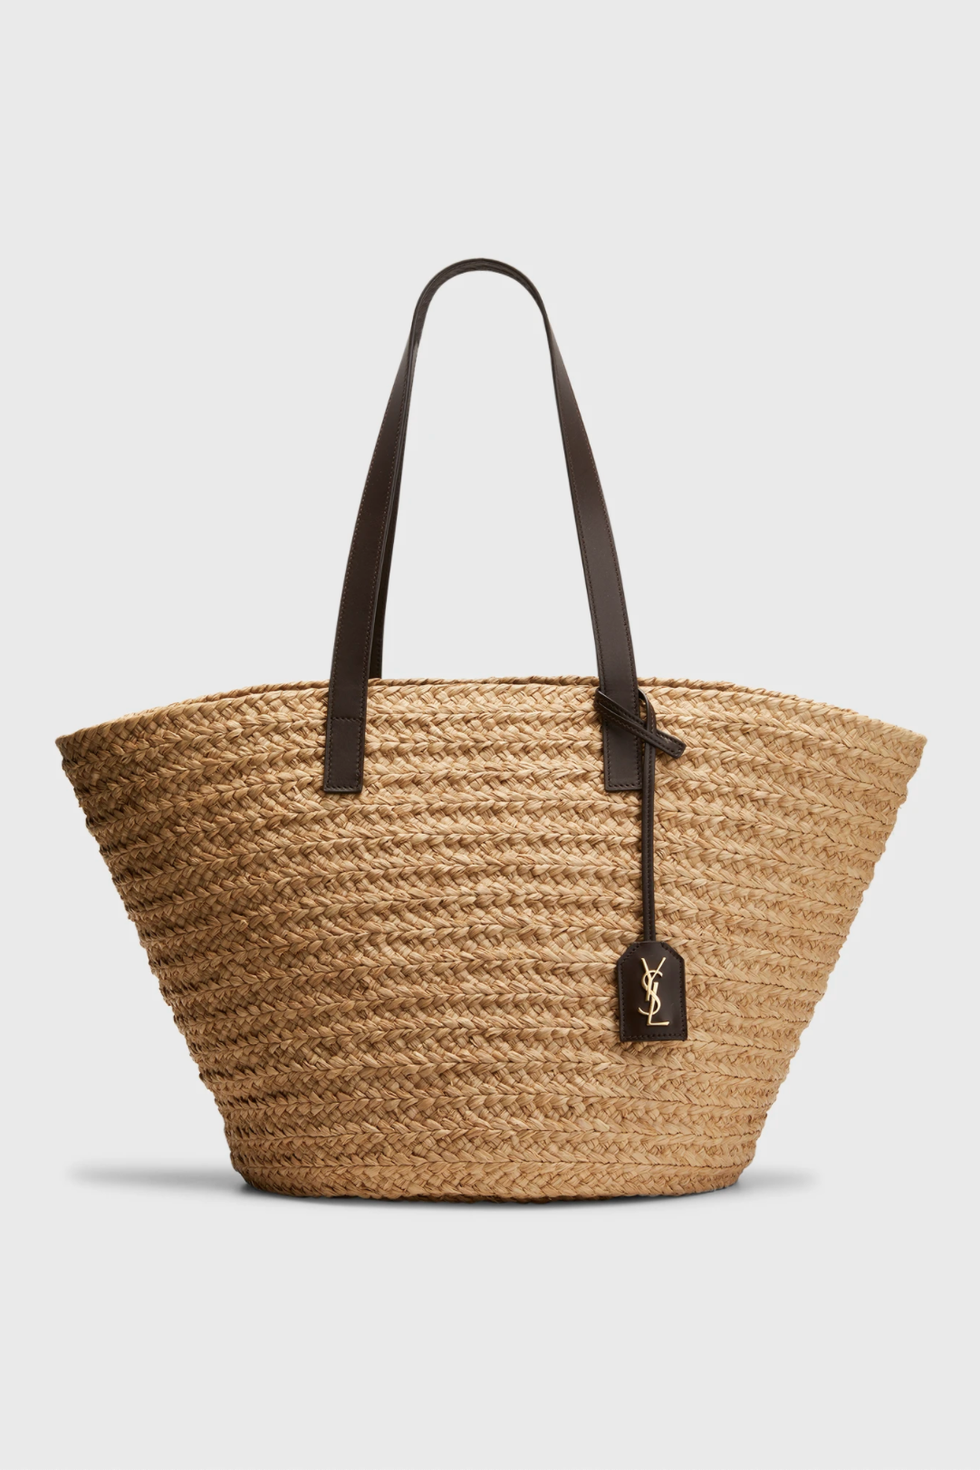 https://hips.hearstapps.com/vader-prod.s3.amazonaws.com/1650659464-best-gifts-new-moms-ysl-straw-tote-1650659411.png?crop=0.9370306181398035xw:1xh;center,top&resize=980:*